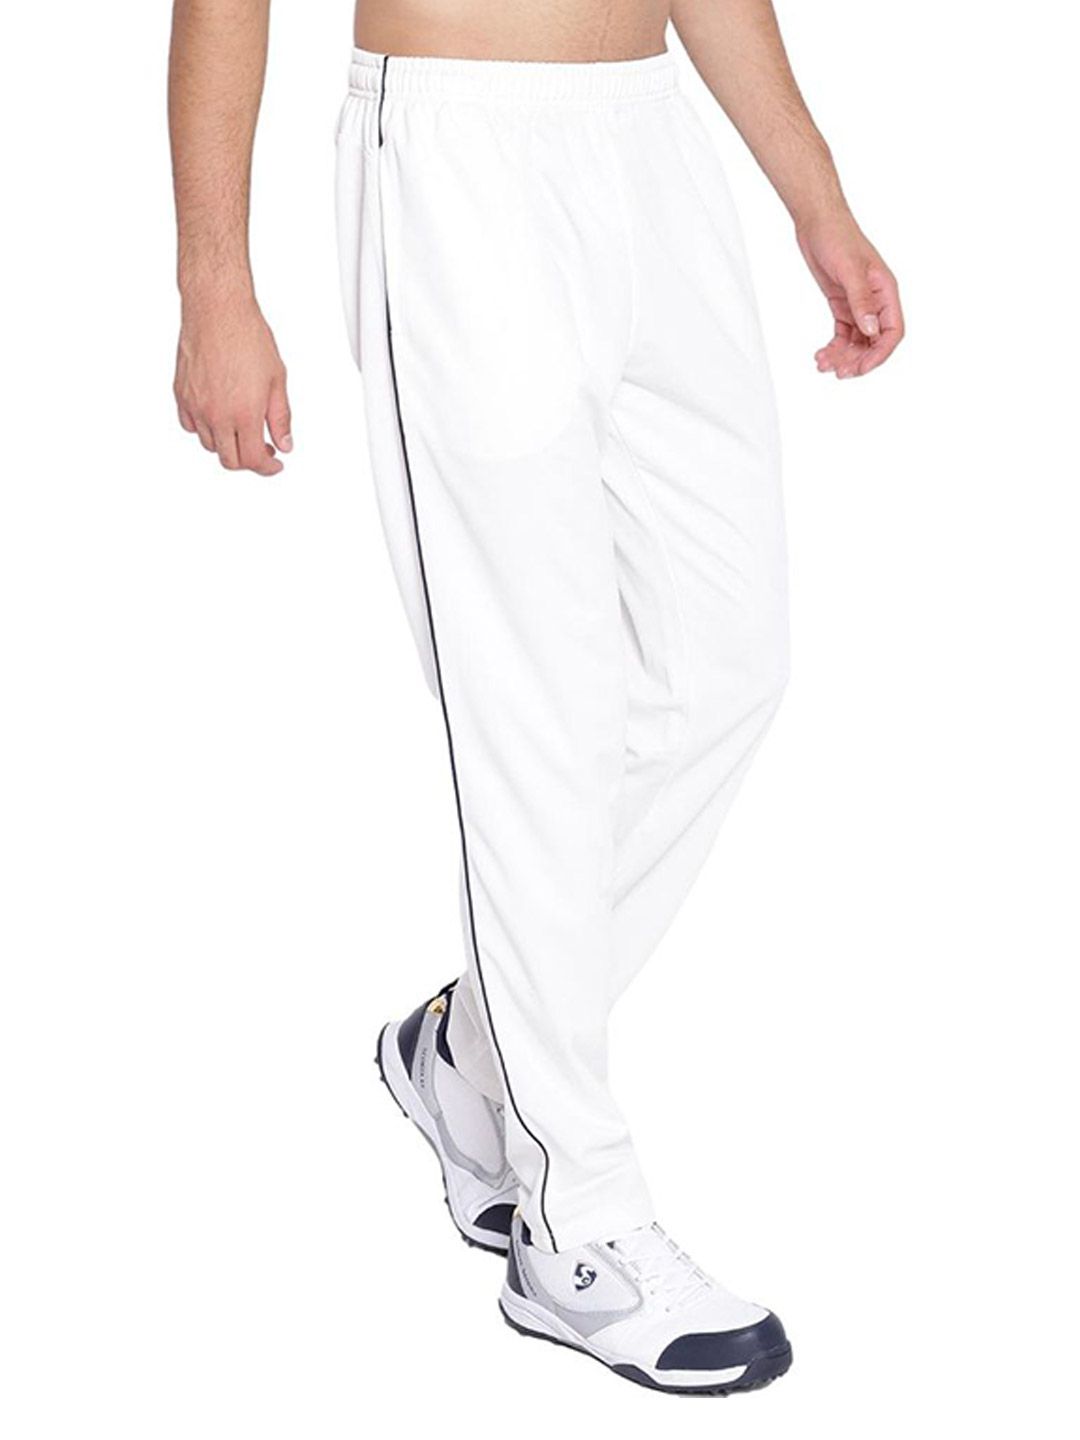 Mens Sports Track Pants Age Group Adults at Best Price in Kolkata  K K  Tailors